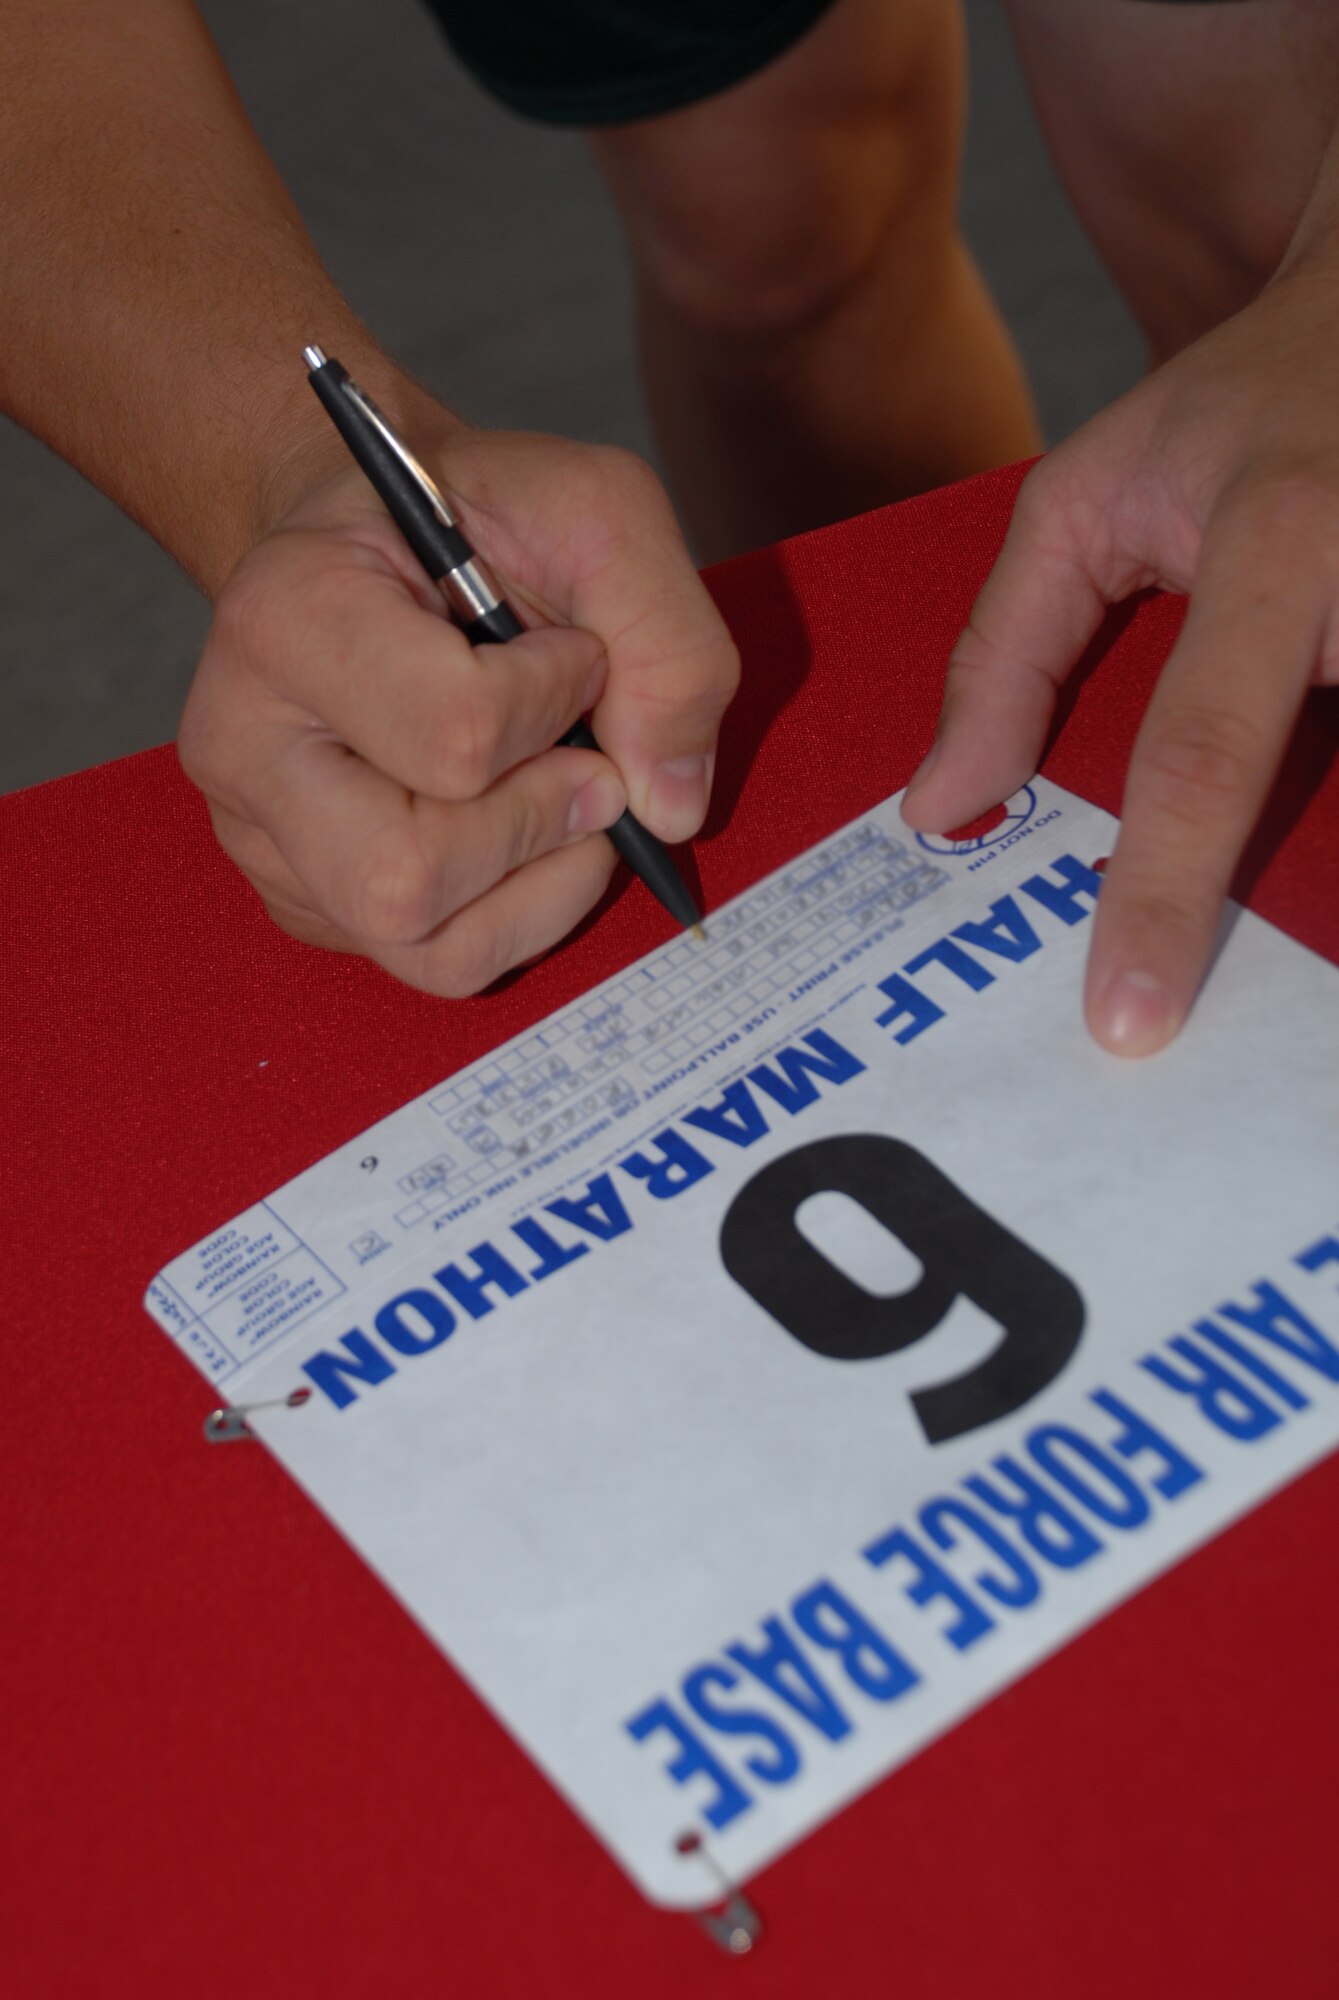 A marathon participant fills out his entry forms before starting the half marathon held at the Base Fitness Center, May 3. The half marathon consisted of more than 50 Airmen, retirees, and children from Luke Air Force Base. (U.S. Air Force photo/Airman 1st Class Tracie Forte)